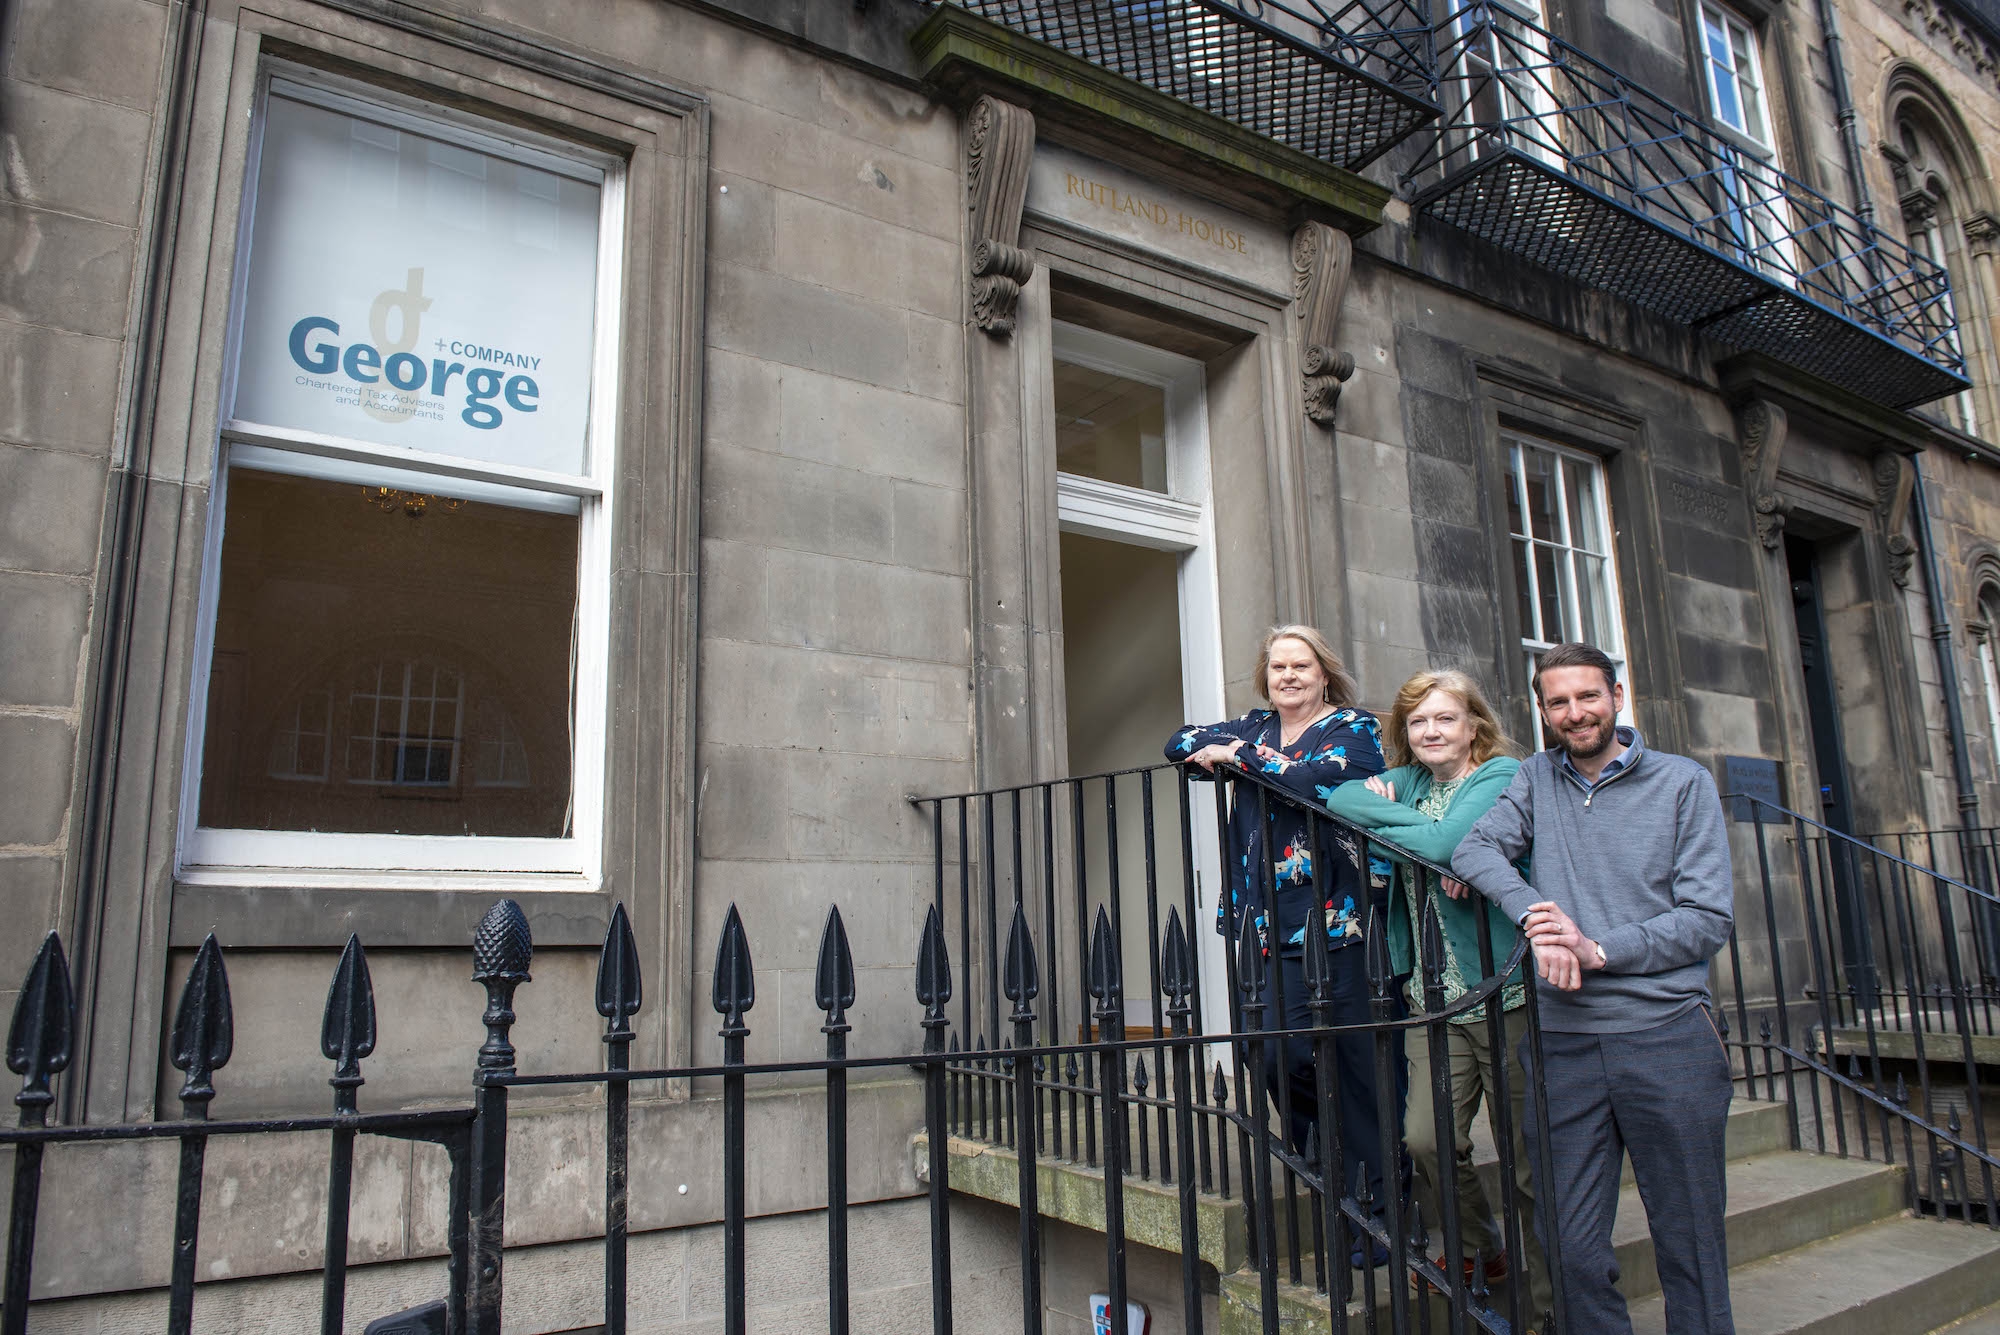 Opulus expands eastward with George + Co acquisition in Edinburgh